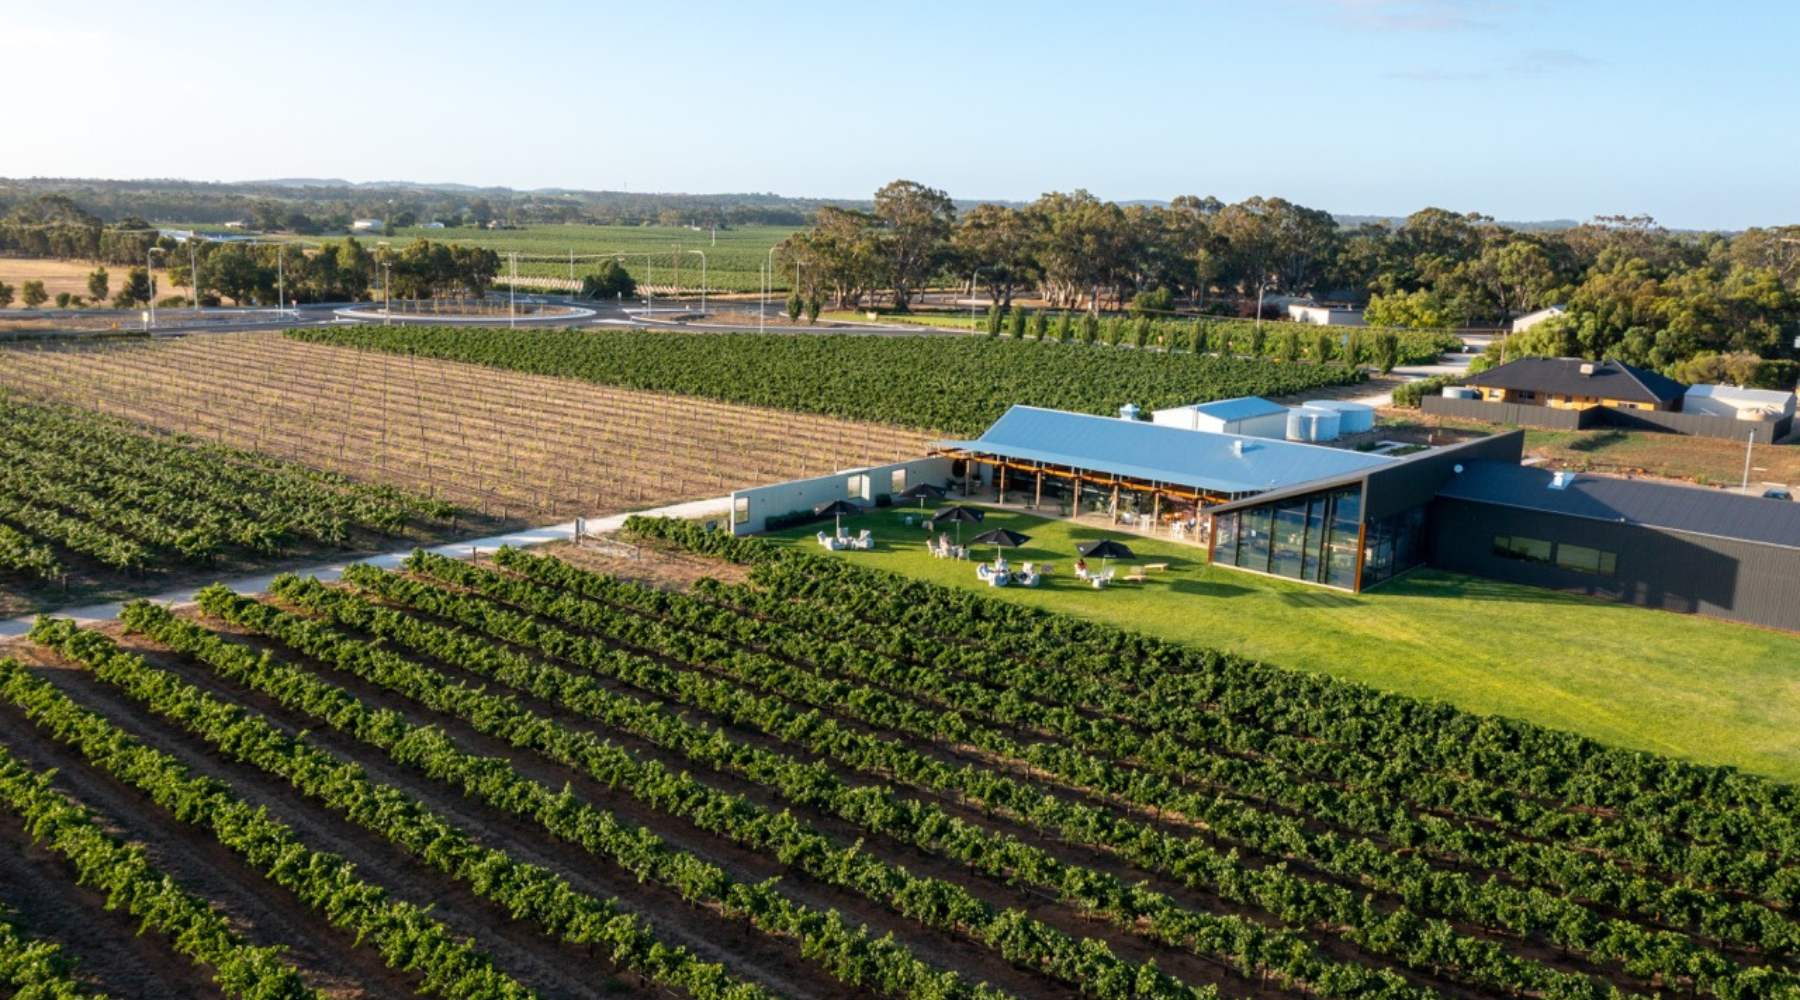 The Evolution of Artisans of Barossa: A Story of Collaboration and Promoting Small-batch Winemaking